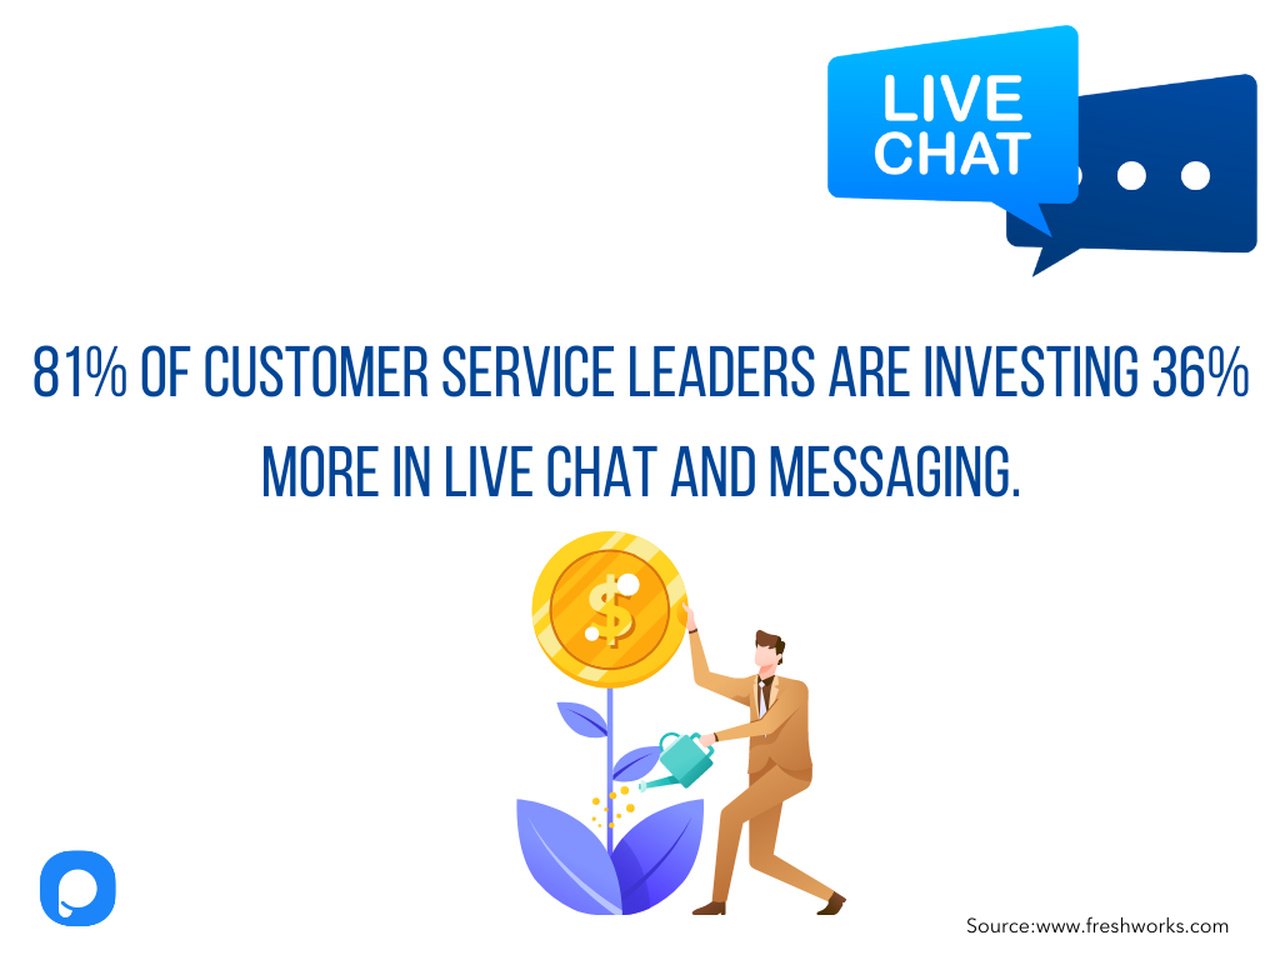 an image of a live chat invesment rate statistic with a man illustration watering a money plant and live chat bubbles in the upper right corner